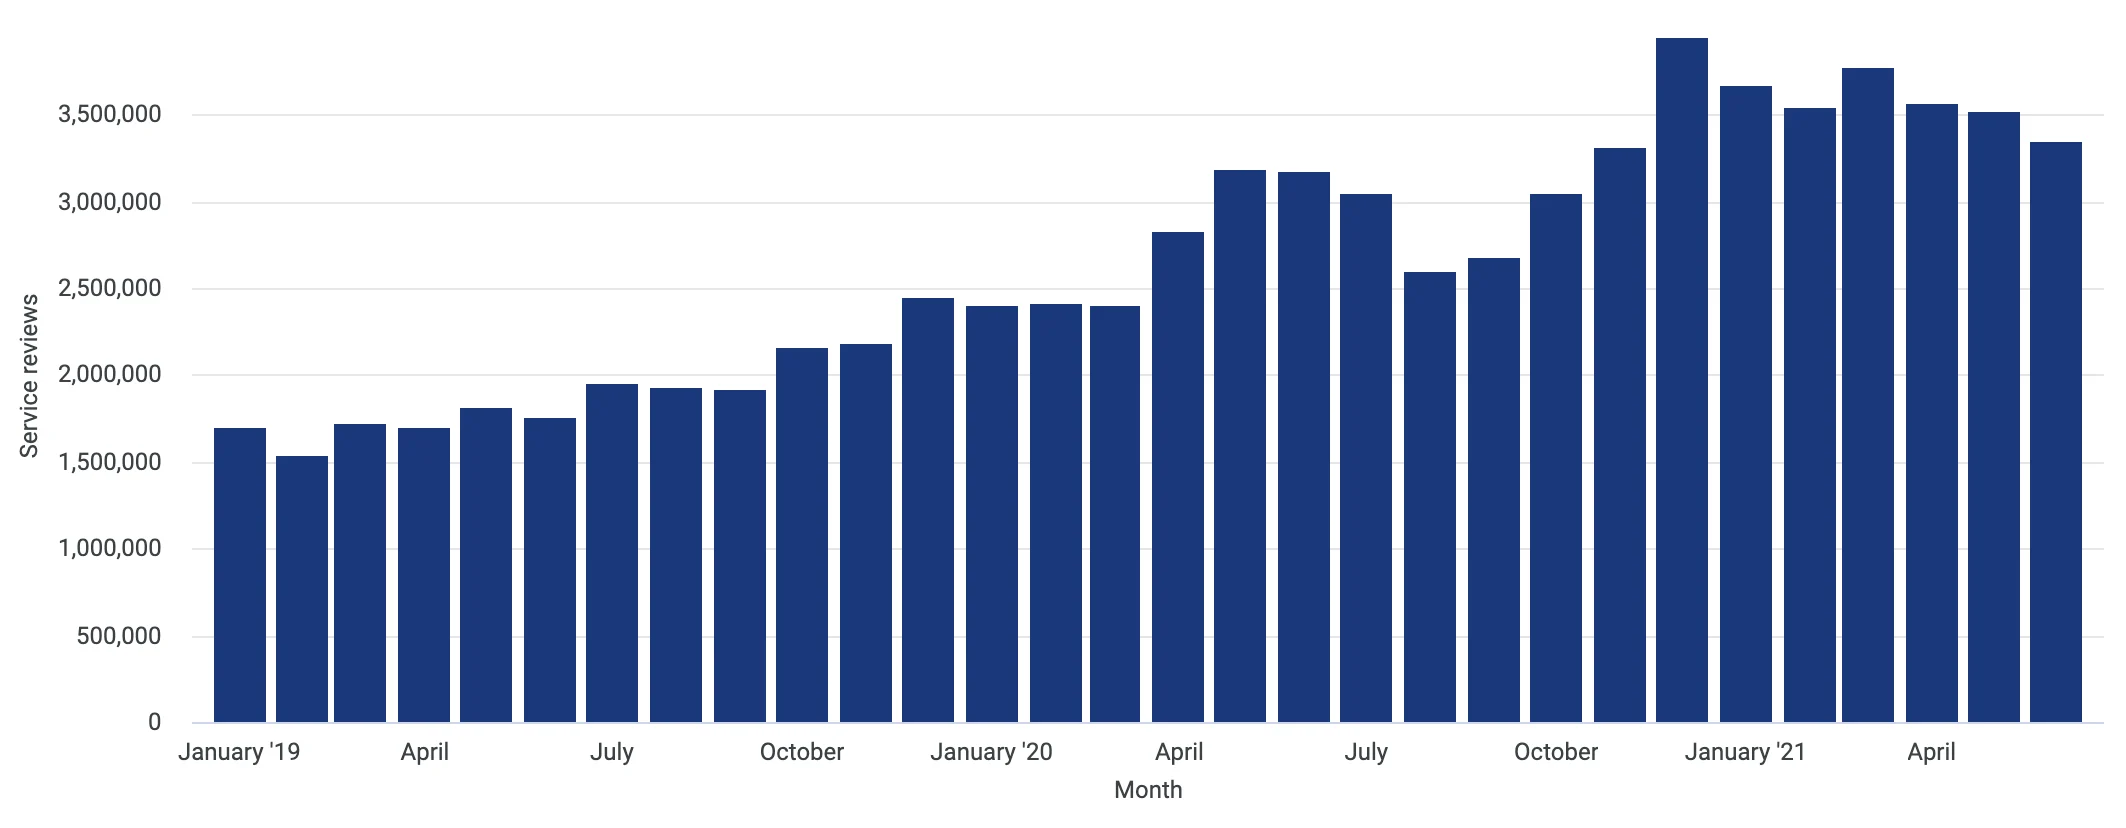 Amount of service reviews left on Trustpilot.com between January 1st 2019 and July 1st 2021